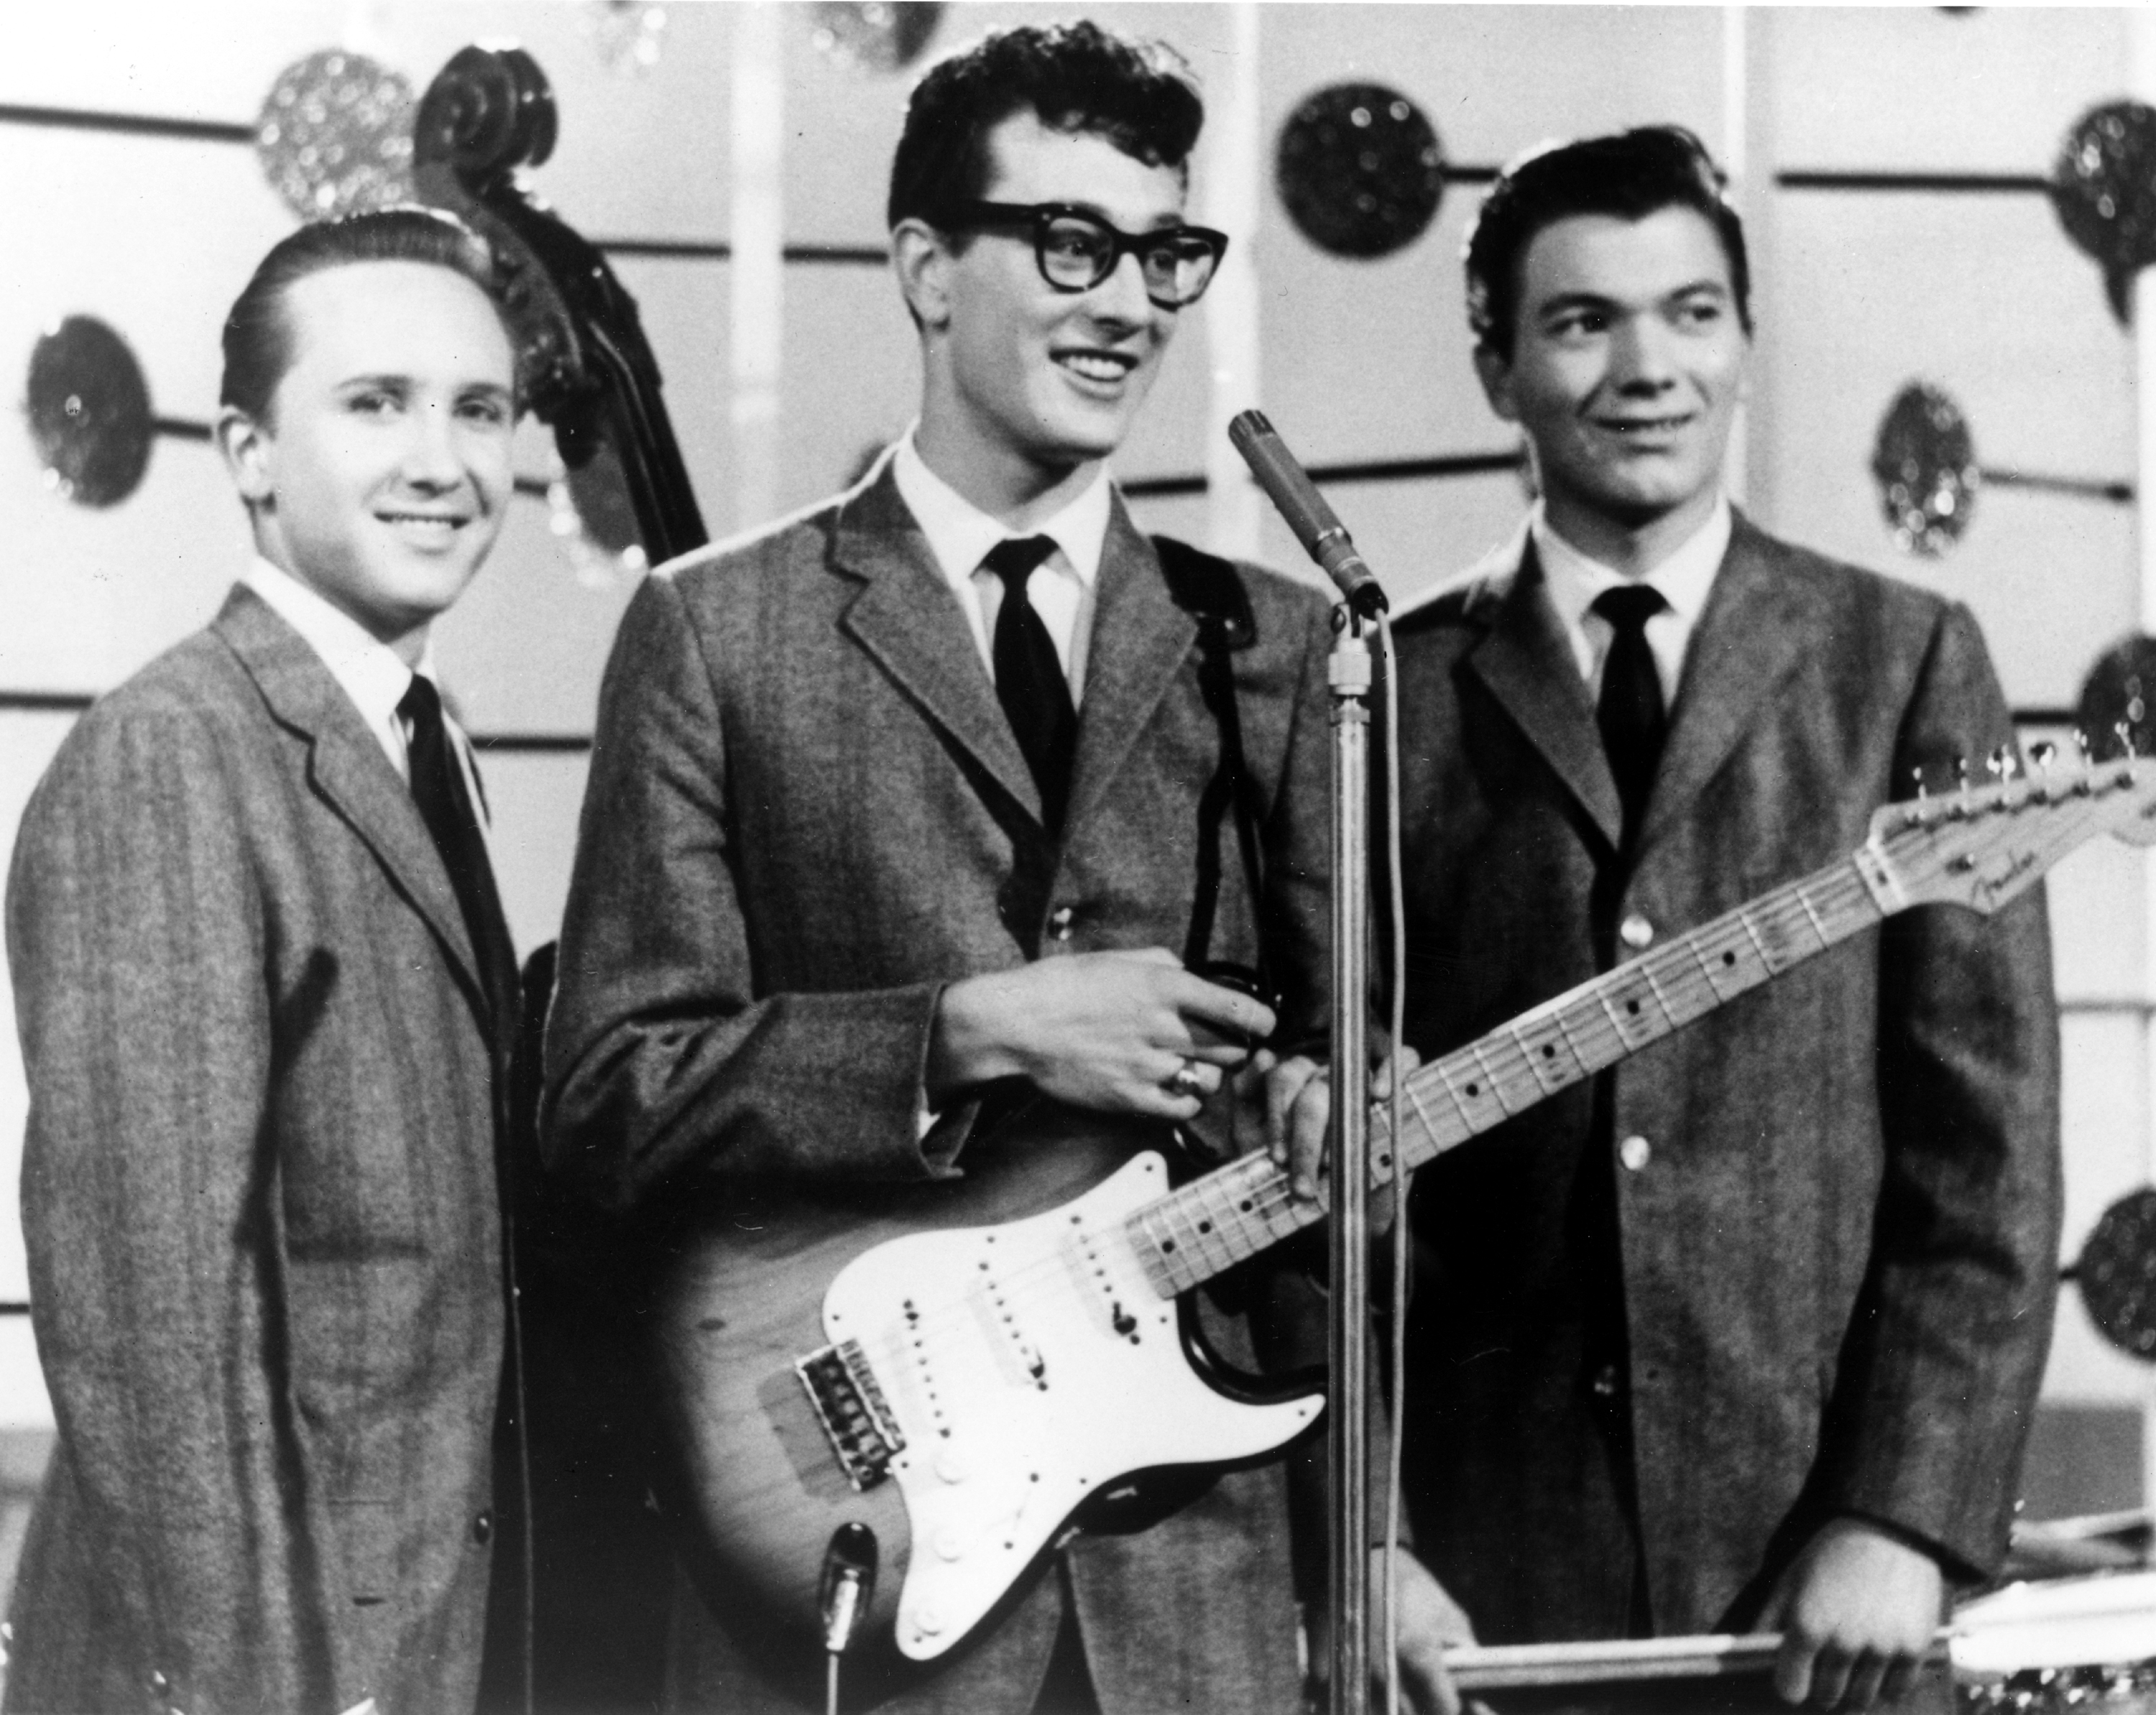 Buddy Holly with band members